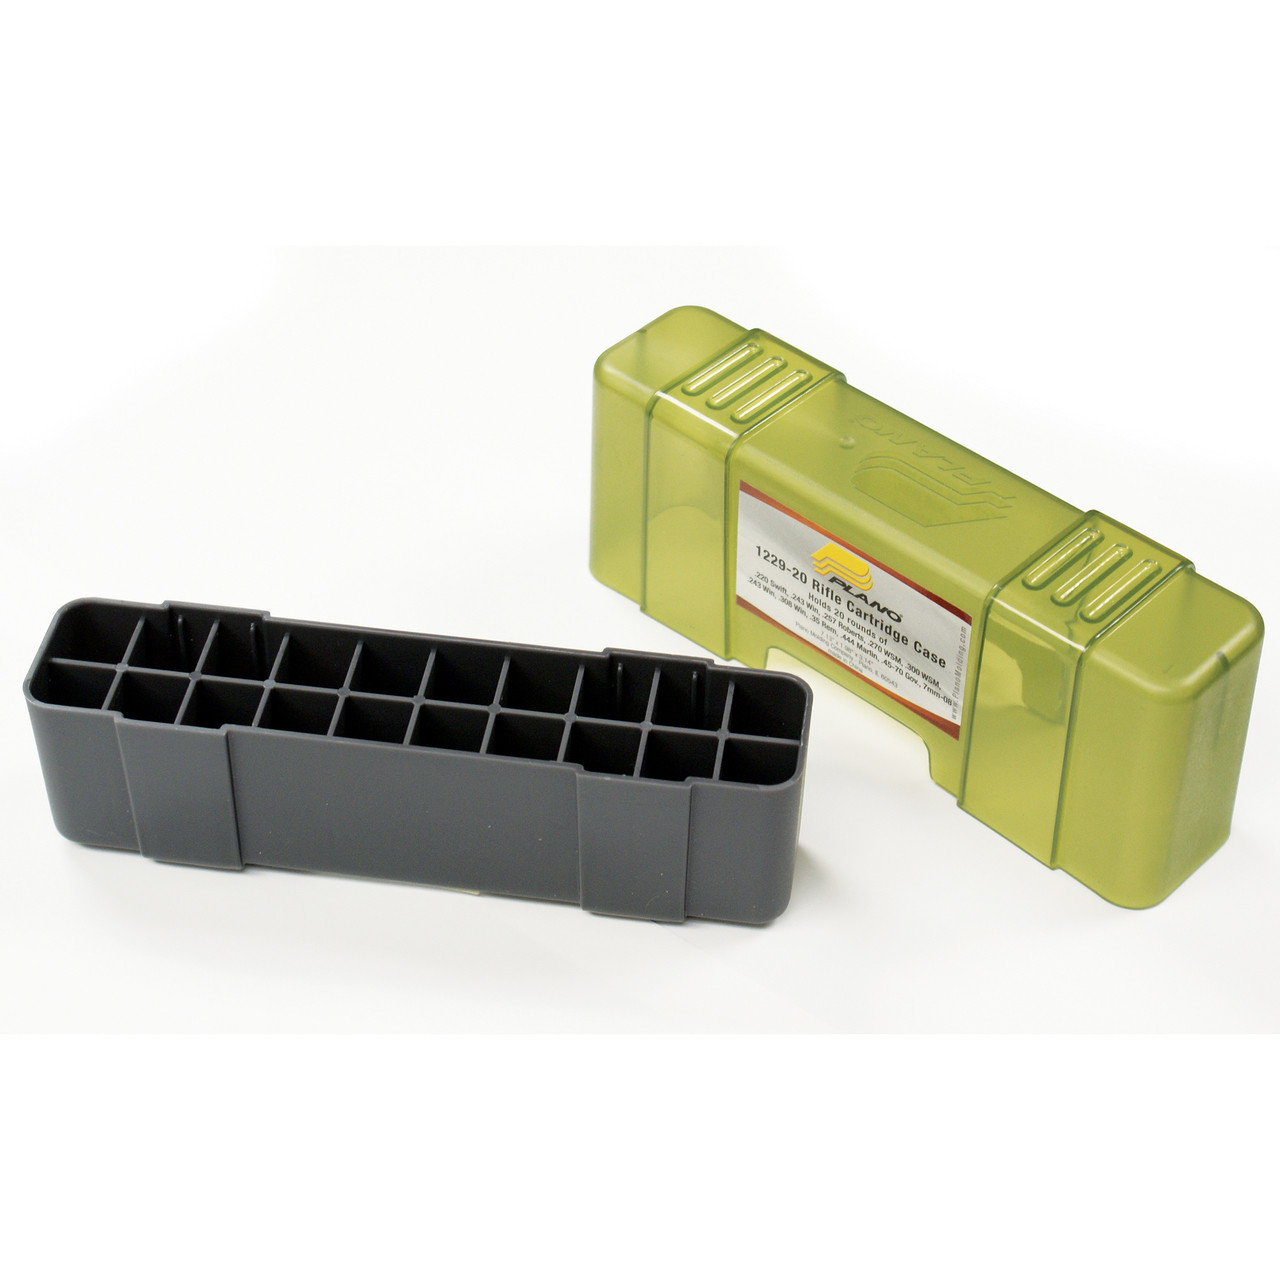 Plano Ammunition Box, Holds 20 Rounds of .220/.243/.257/.270/.300/.308/.444  Rifle Rounds, Charcoal/Green , 6 Pack 1229-20, UPC : 024099122924